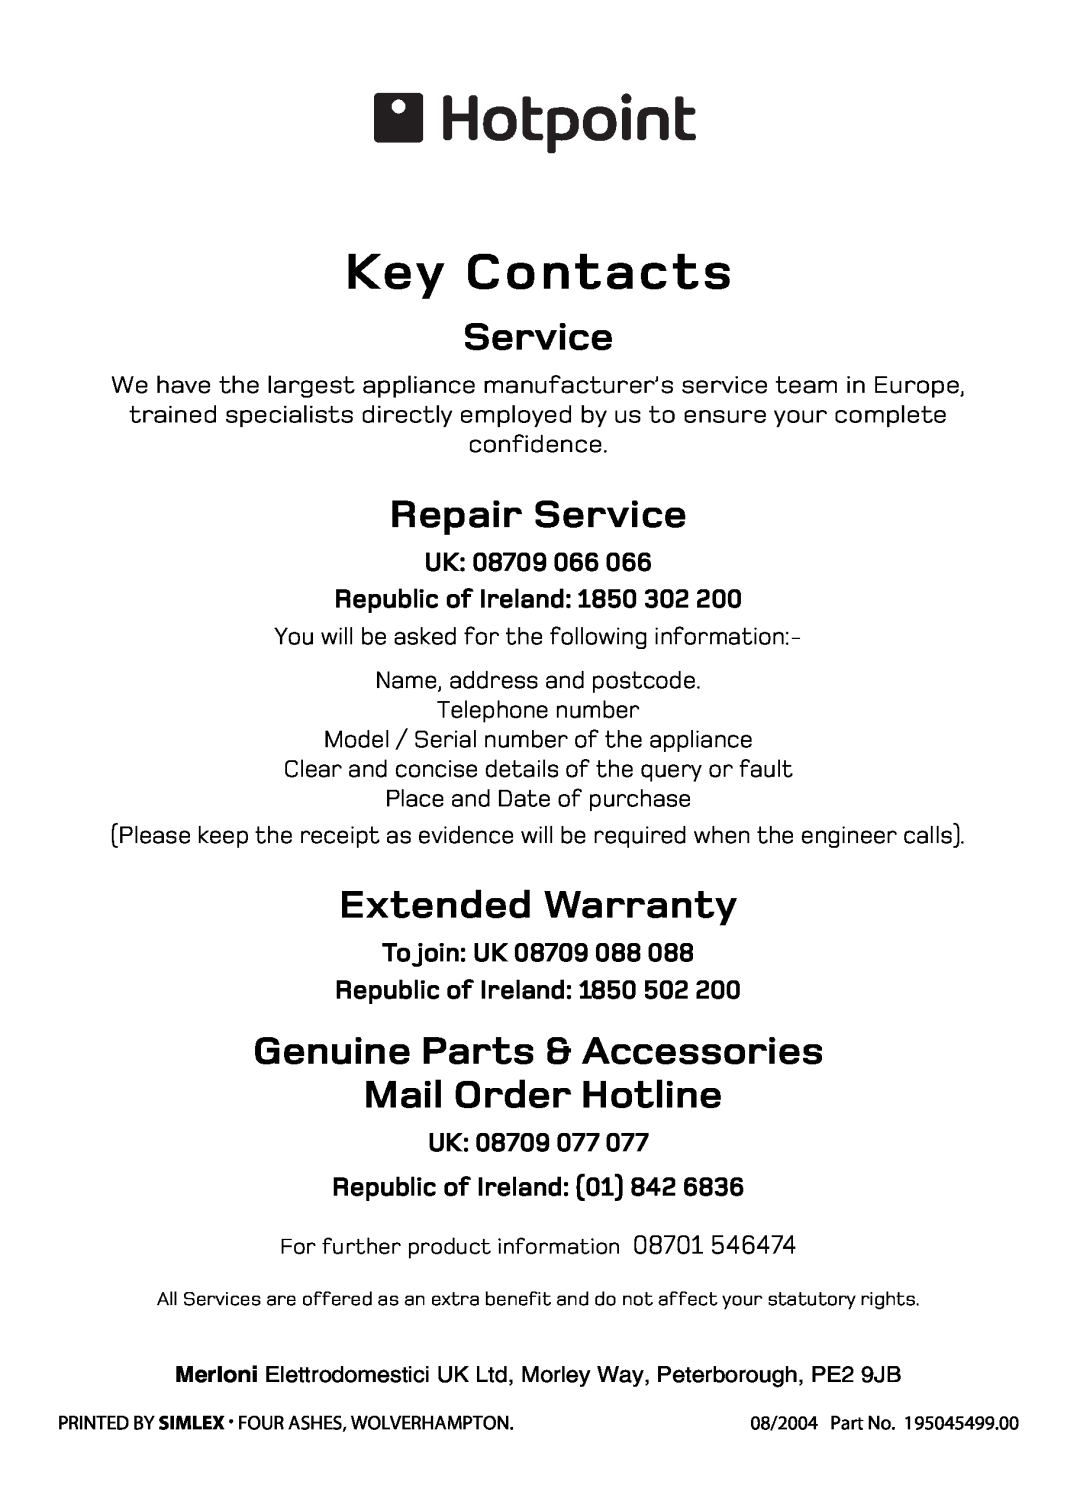 Hotpoint H250E manual Repair Service, Extended Warranty, Genuine Parts & Accessories Mail Order Hotline, To join UK 